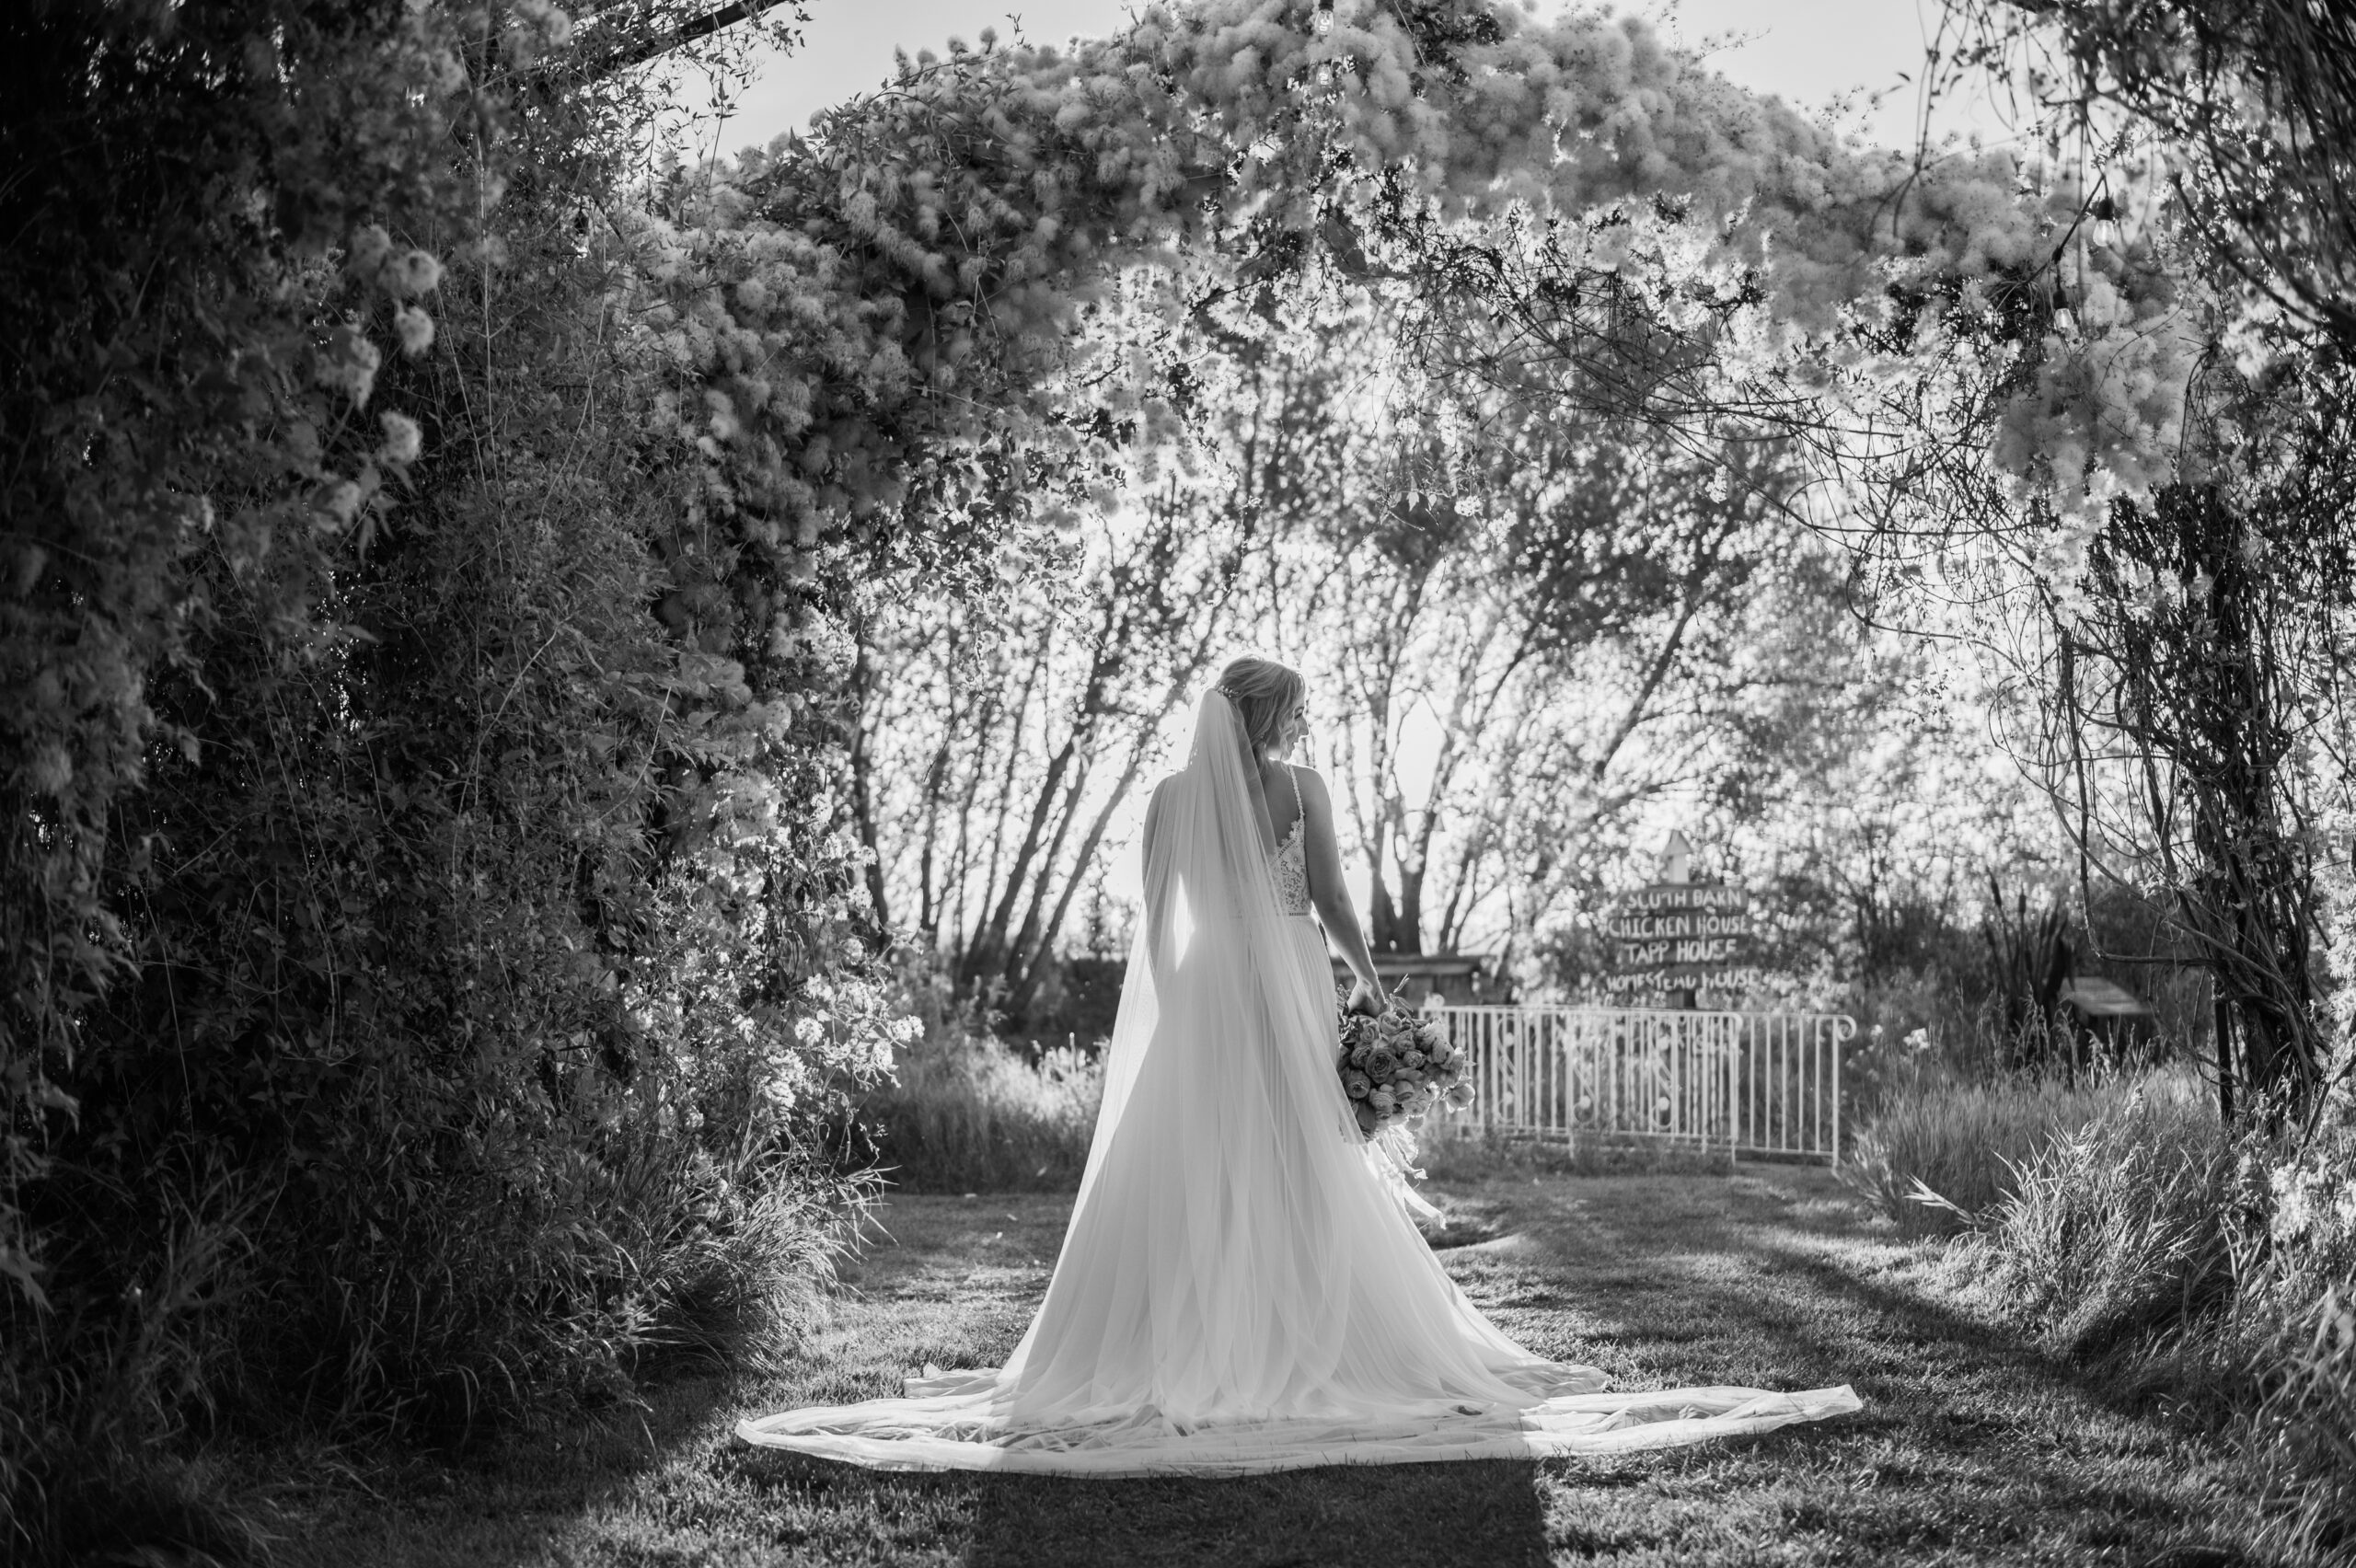 bride under foliage archway with sun shining behind her at golden hour black and white wedding portrait